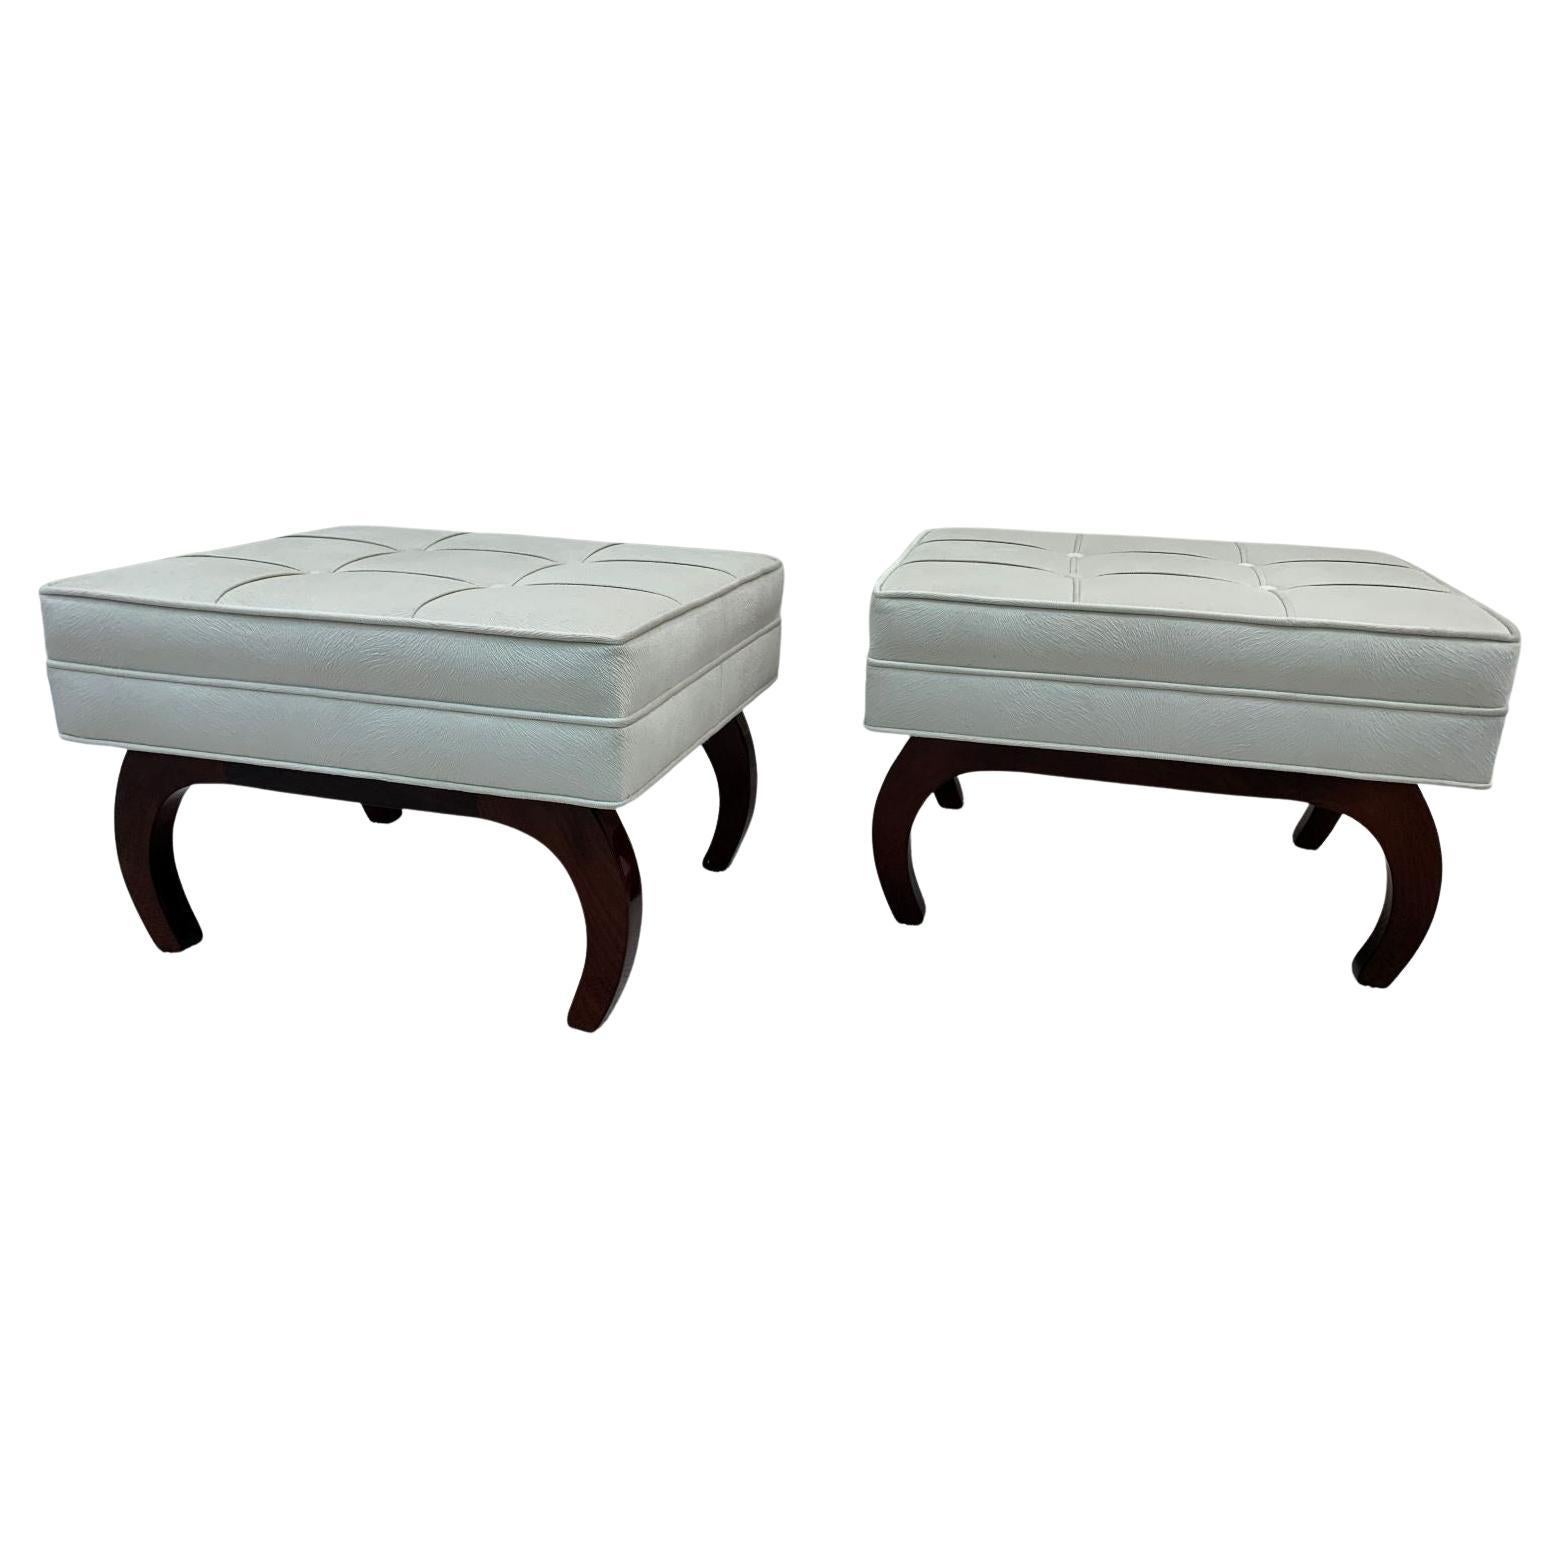 Pair of French Art Deco benches with solid walnut bases. A tailored and tufted look make these benches a perfect fit for any seating purpose. The faux pony skin upholstery is a nice compliment to the curved-leg walnut bases. Measures: Width 22.5,